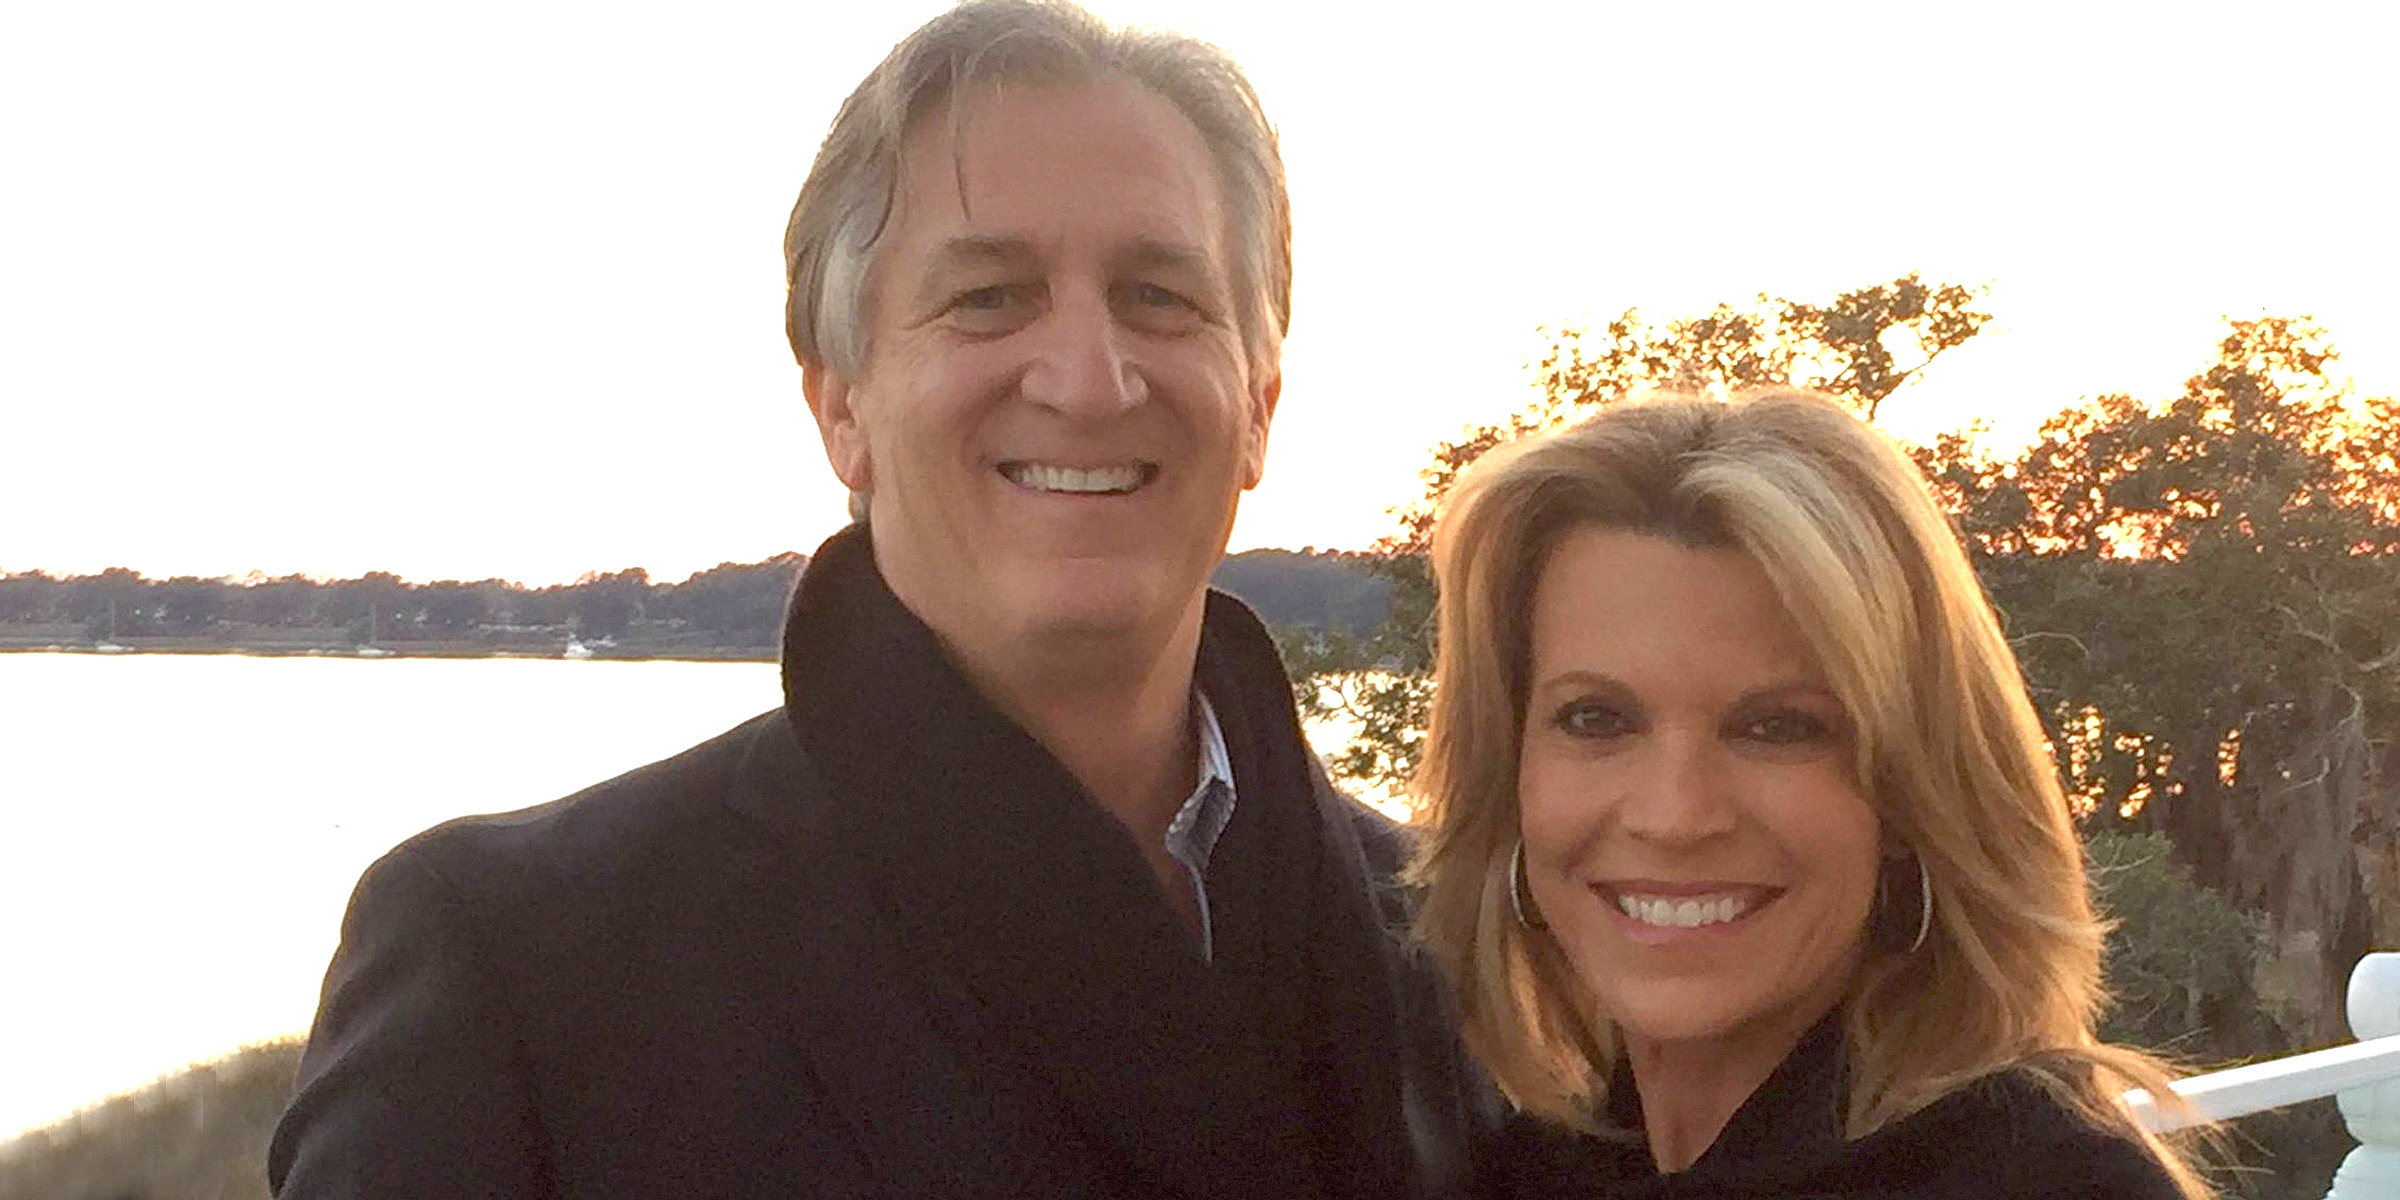 Vanna White and Her Brother Chip White | Source: Facebook/OfficialVannaWhite